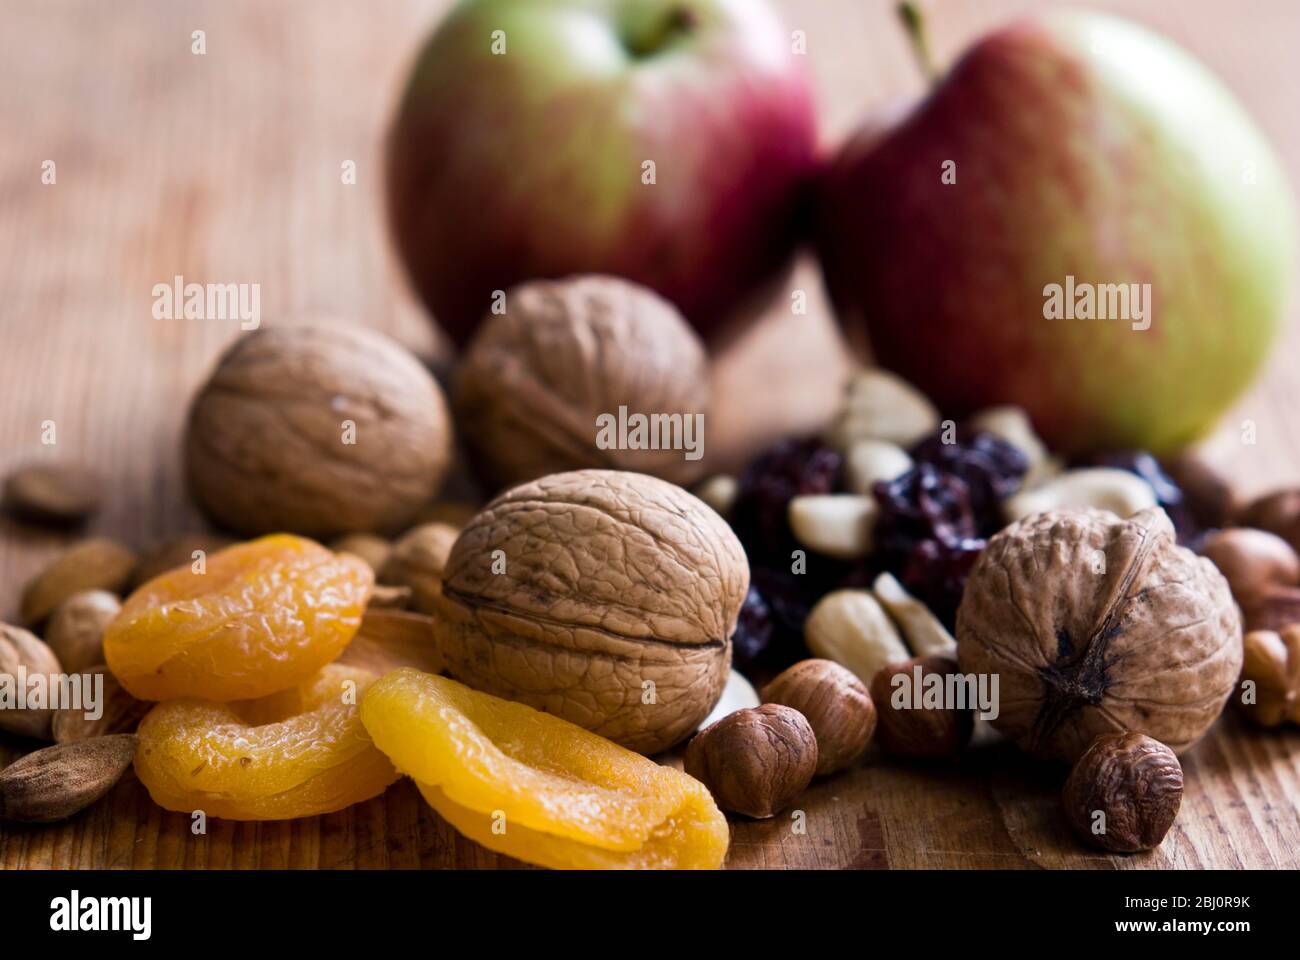 Selection of healthy snacks, on natural wooden surface - Stock Photo